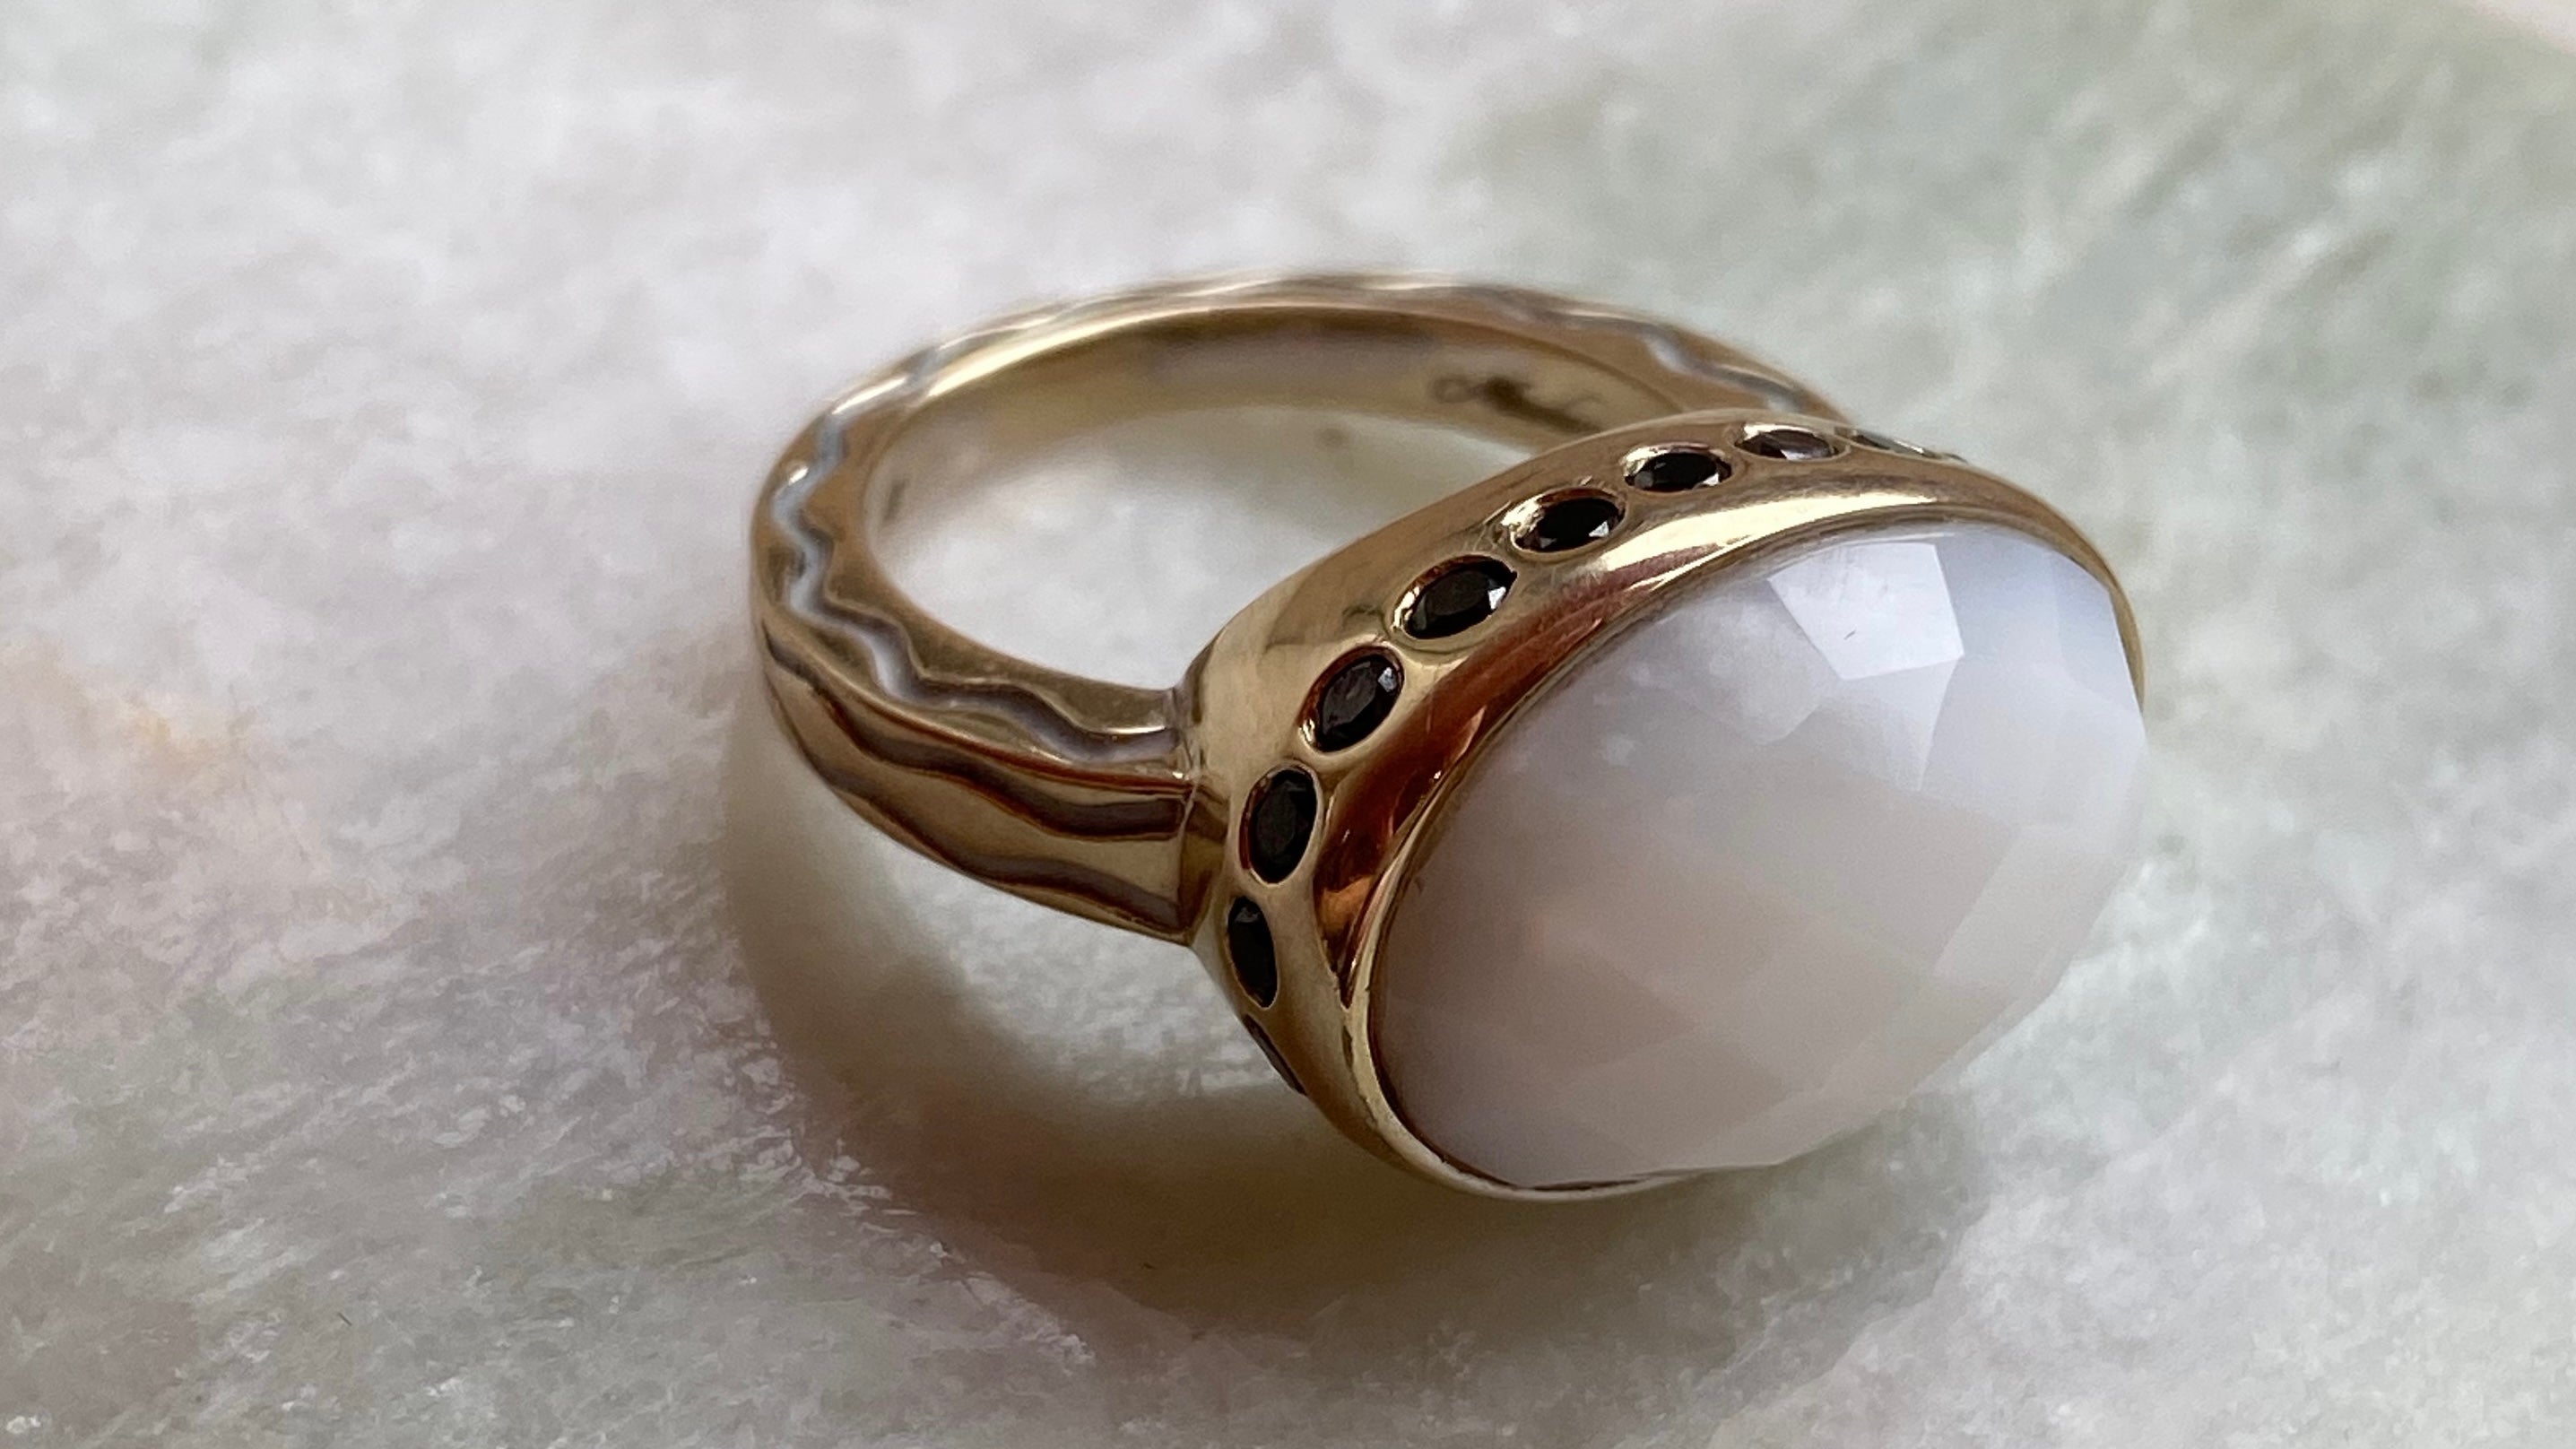 Opal Ring: Can You Wear It Every Day